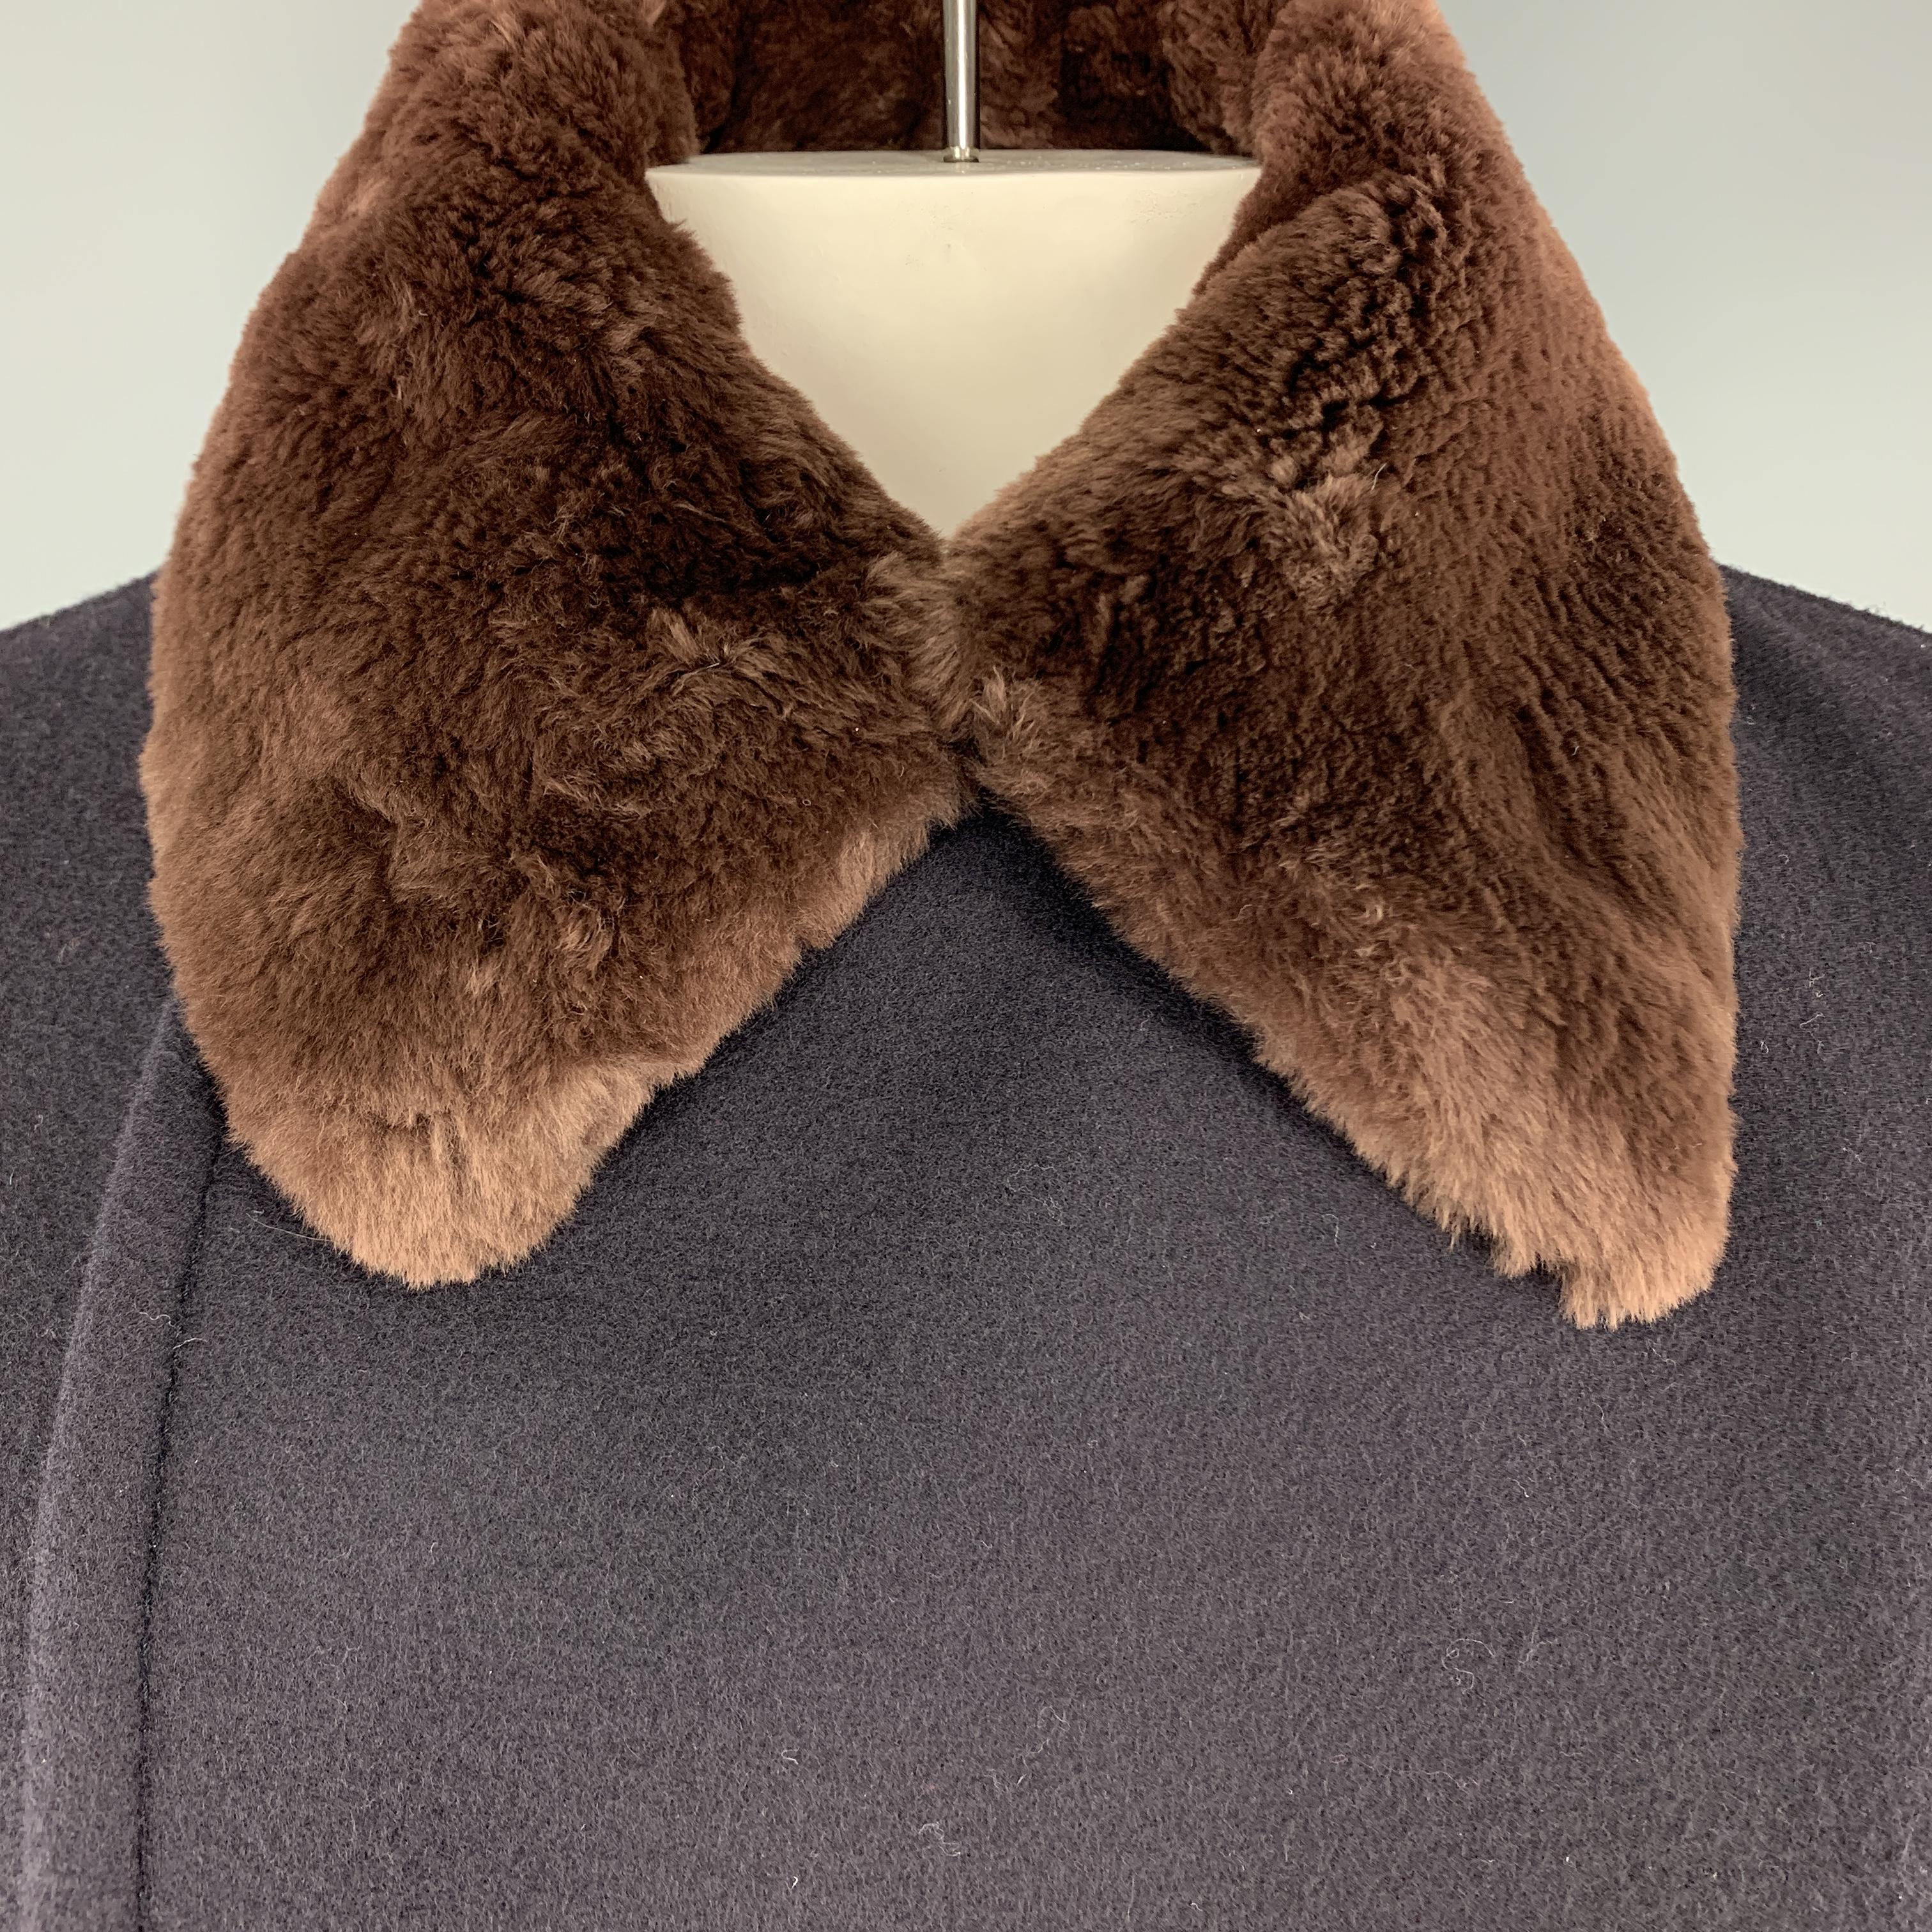 PRADA pea coat comes in navy wool with a double breasted button front, slanted pockets, and detachable brown nutria fur collar. Made in Italy.

Excellent Pre-Owned Condition.
Marked: IT 56

Measurements:

Shoulder: 19 in.
Chest: 48 in.
Sleeve: 26.5